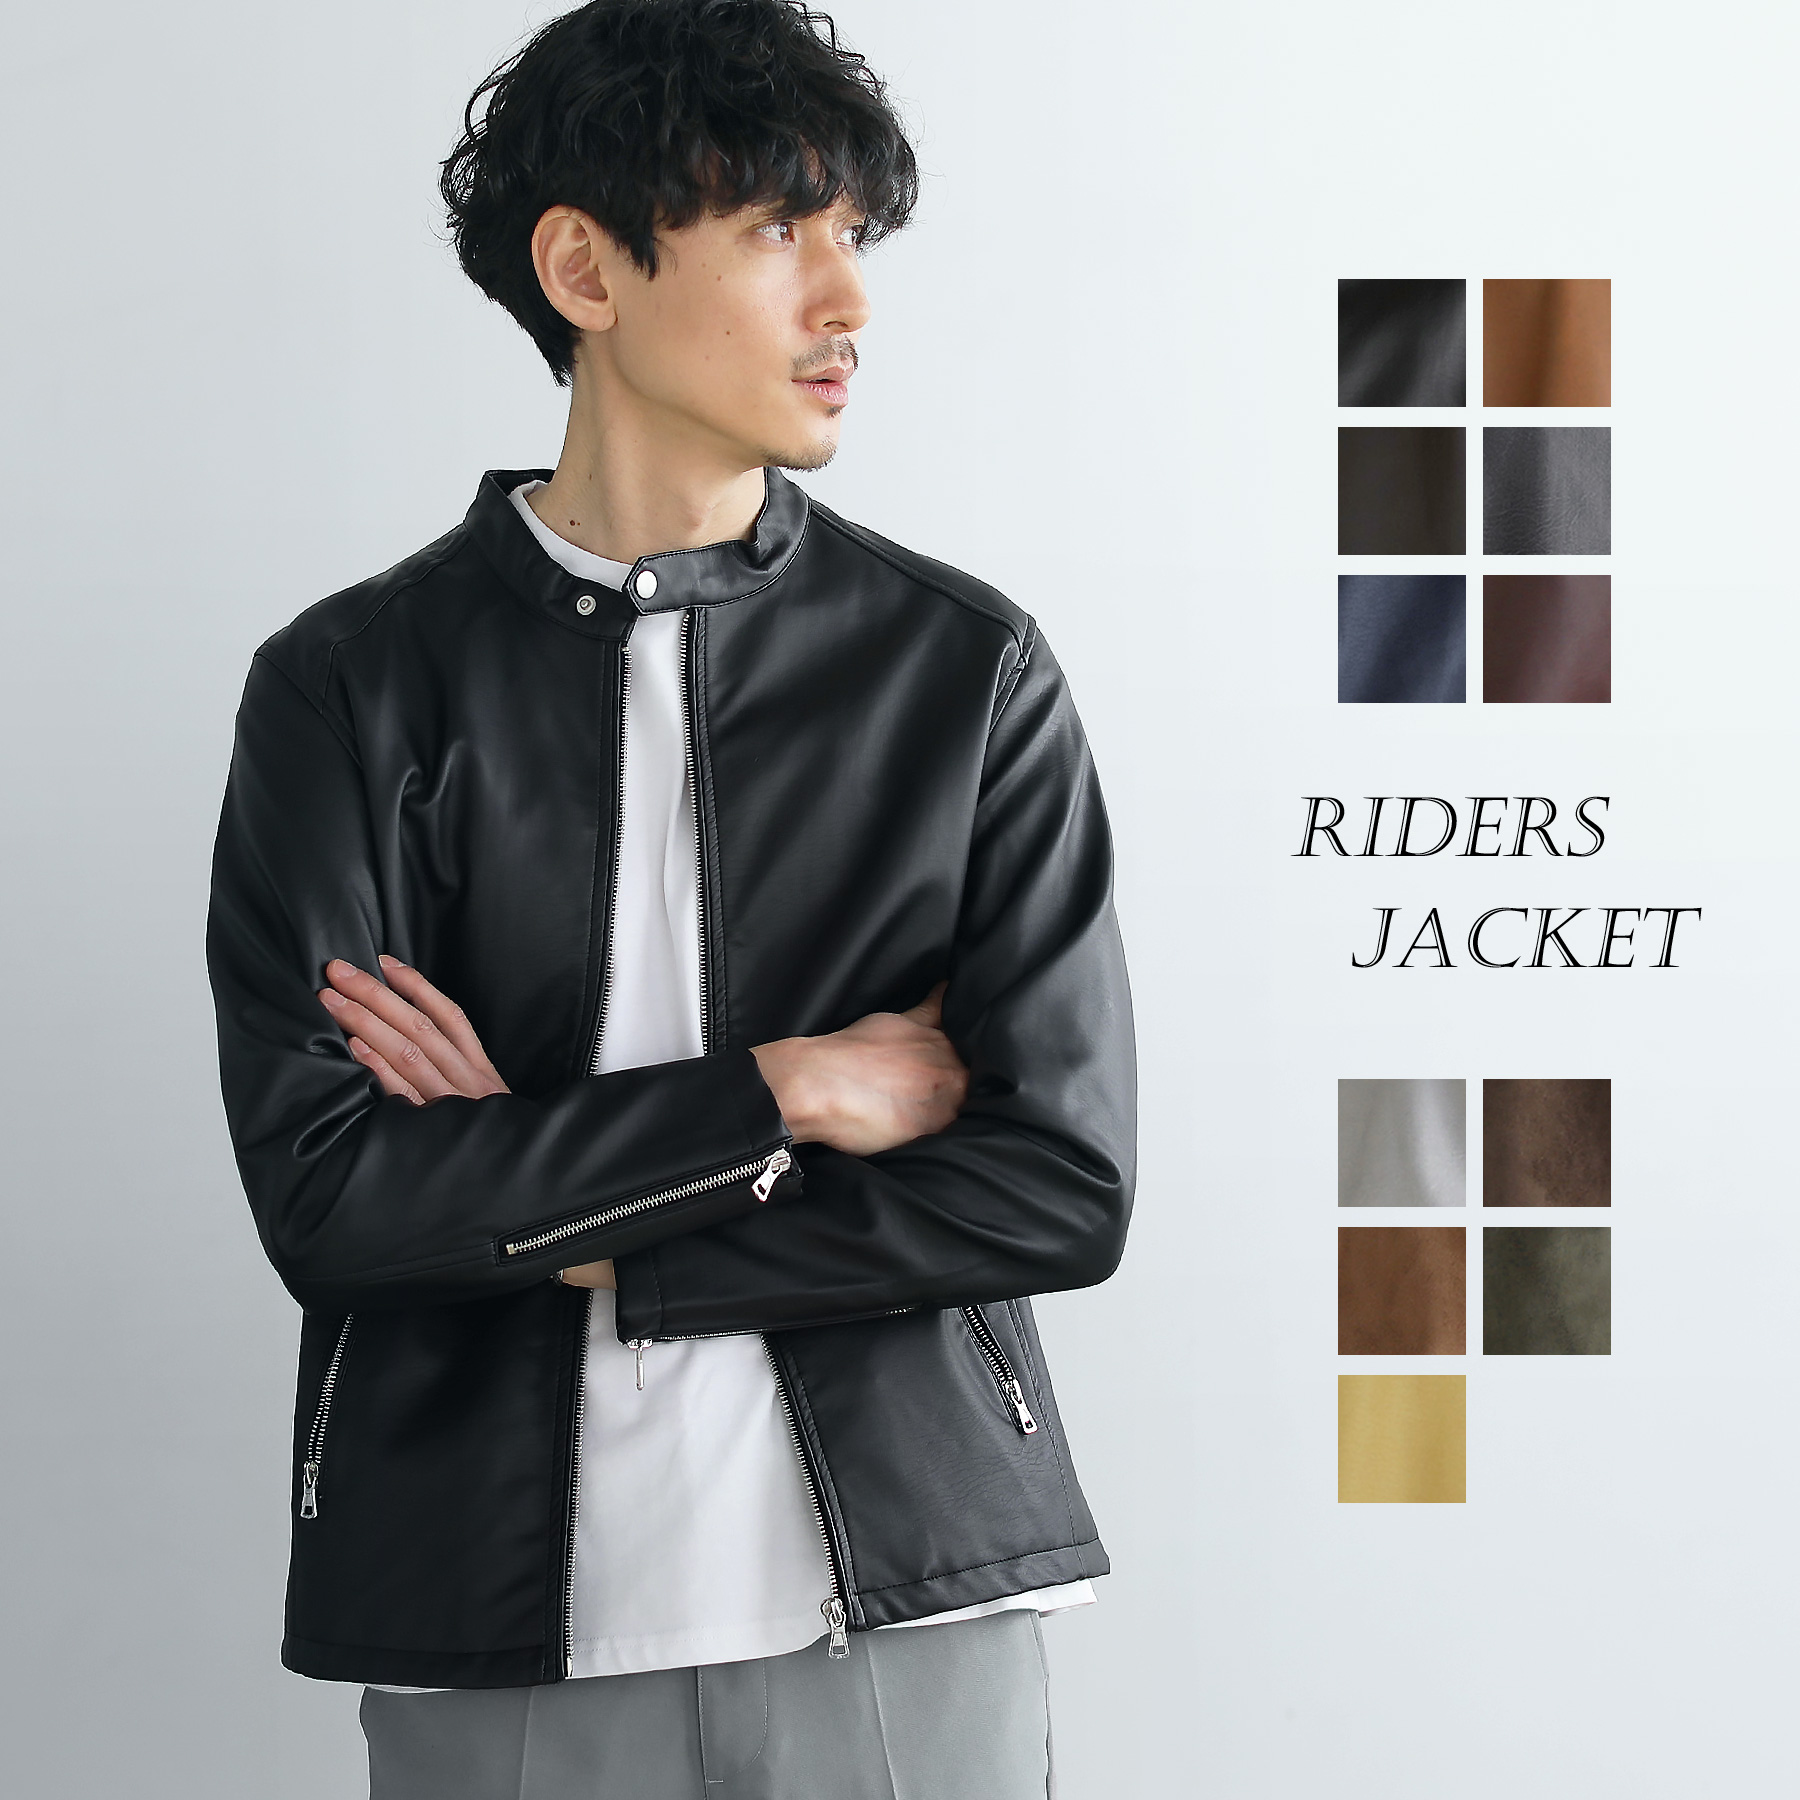  rider's jacket men's PU leather jacket single rider's jacket synthetic leather rayon polyester 